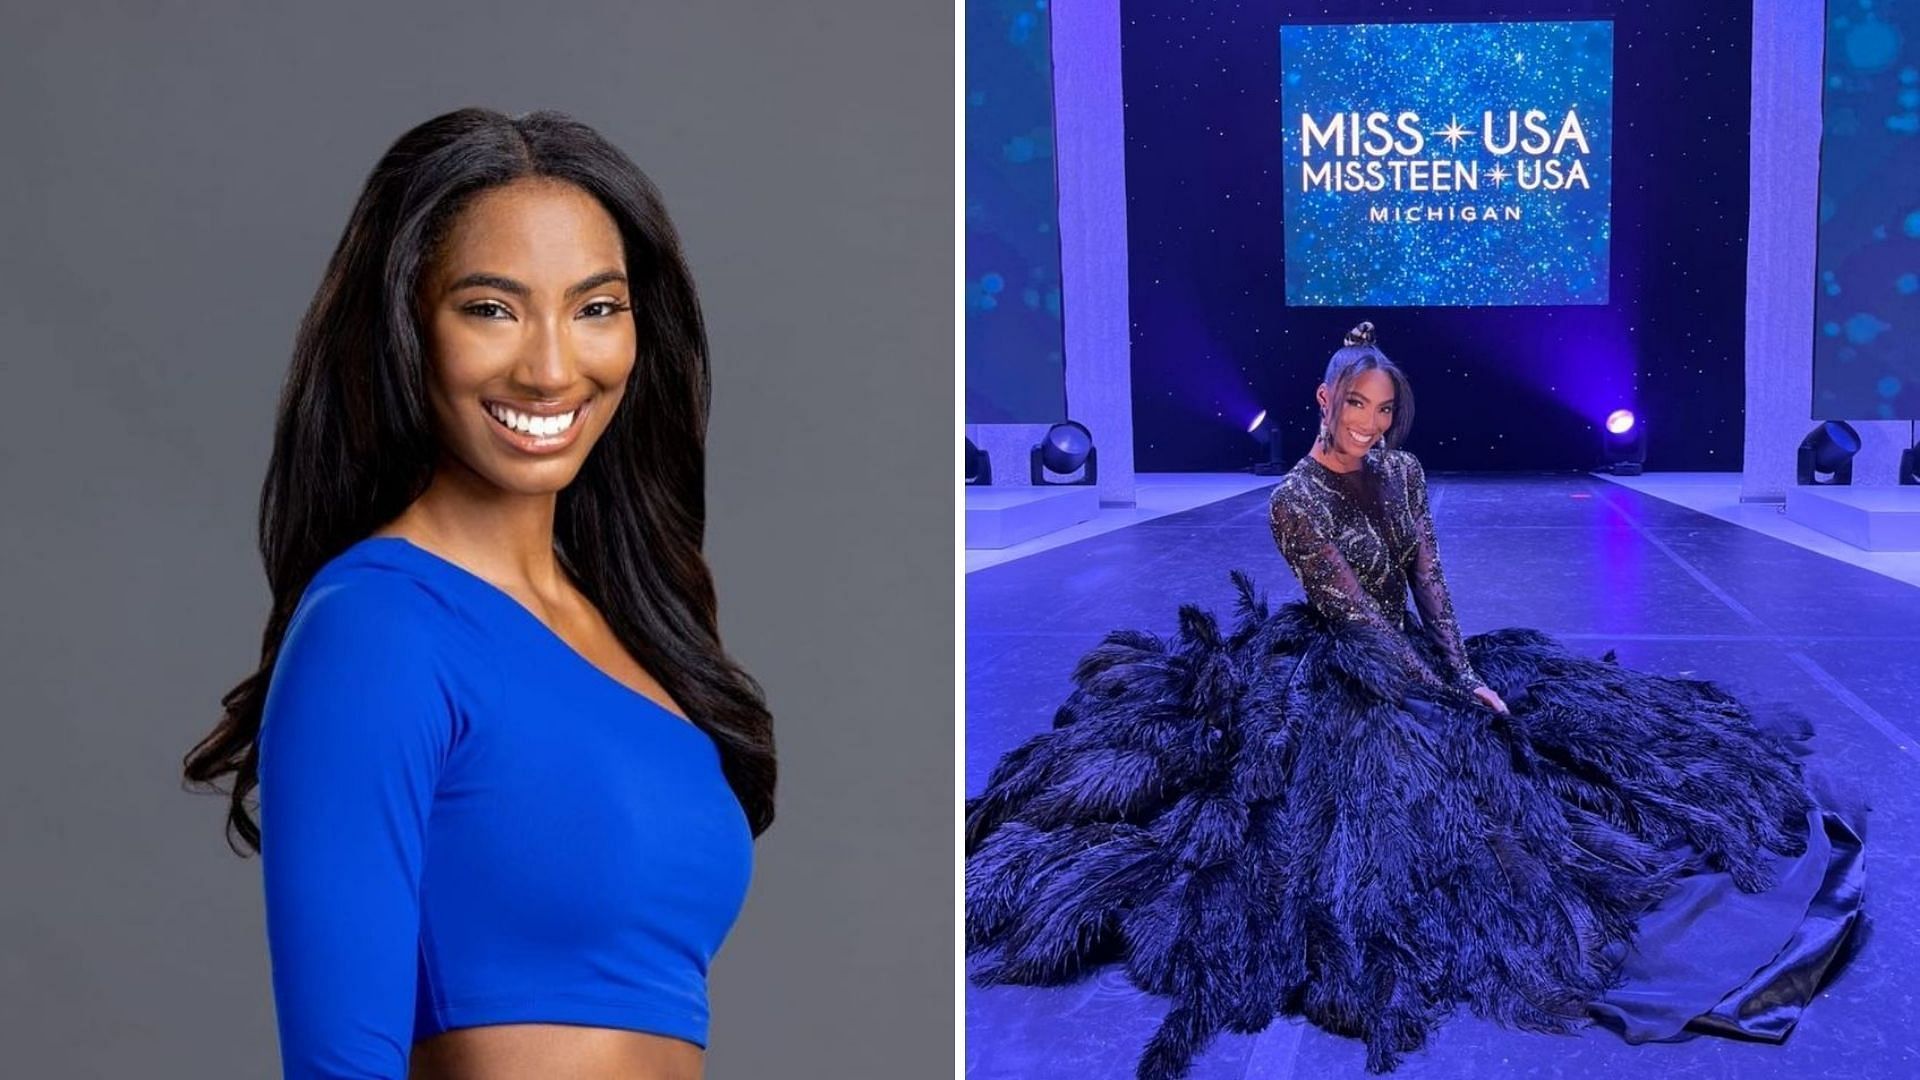 Taylor Hale emerges as the fan favorite of Big Brother Season 24 (Image via ibbinsider/Instagram and Miss Michigan USA/Facebook)